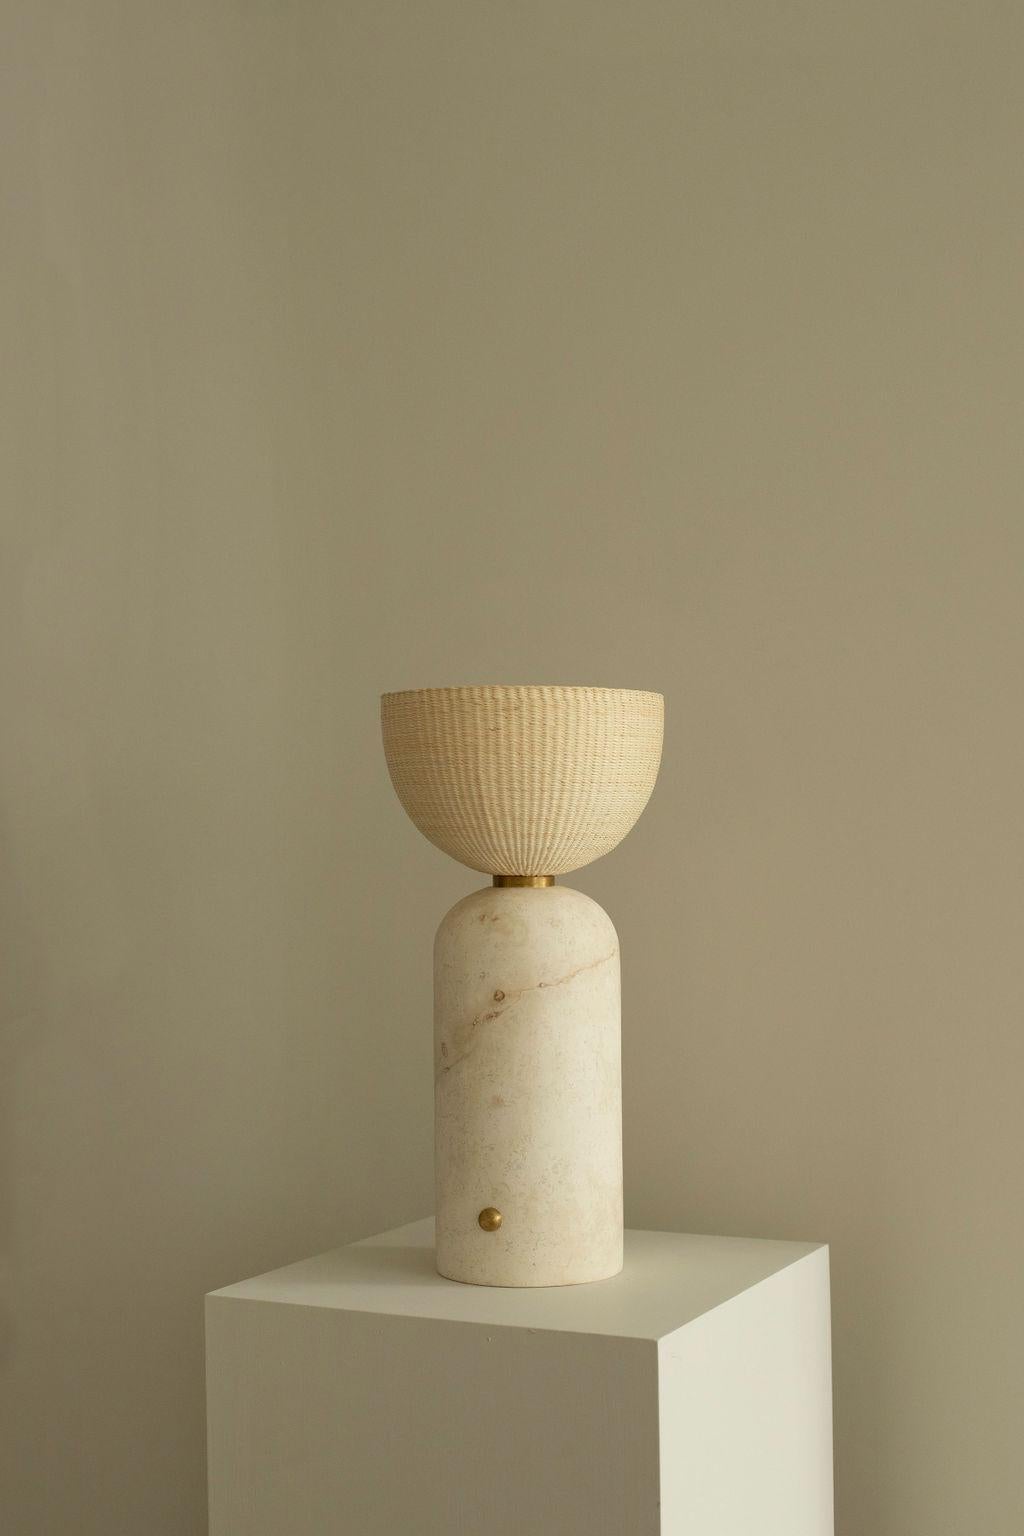 Artisanal Tamo Low Table Lamp  In New Condition For Sale In Mexico City, MX